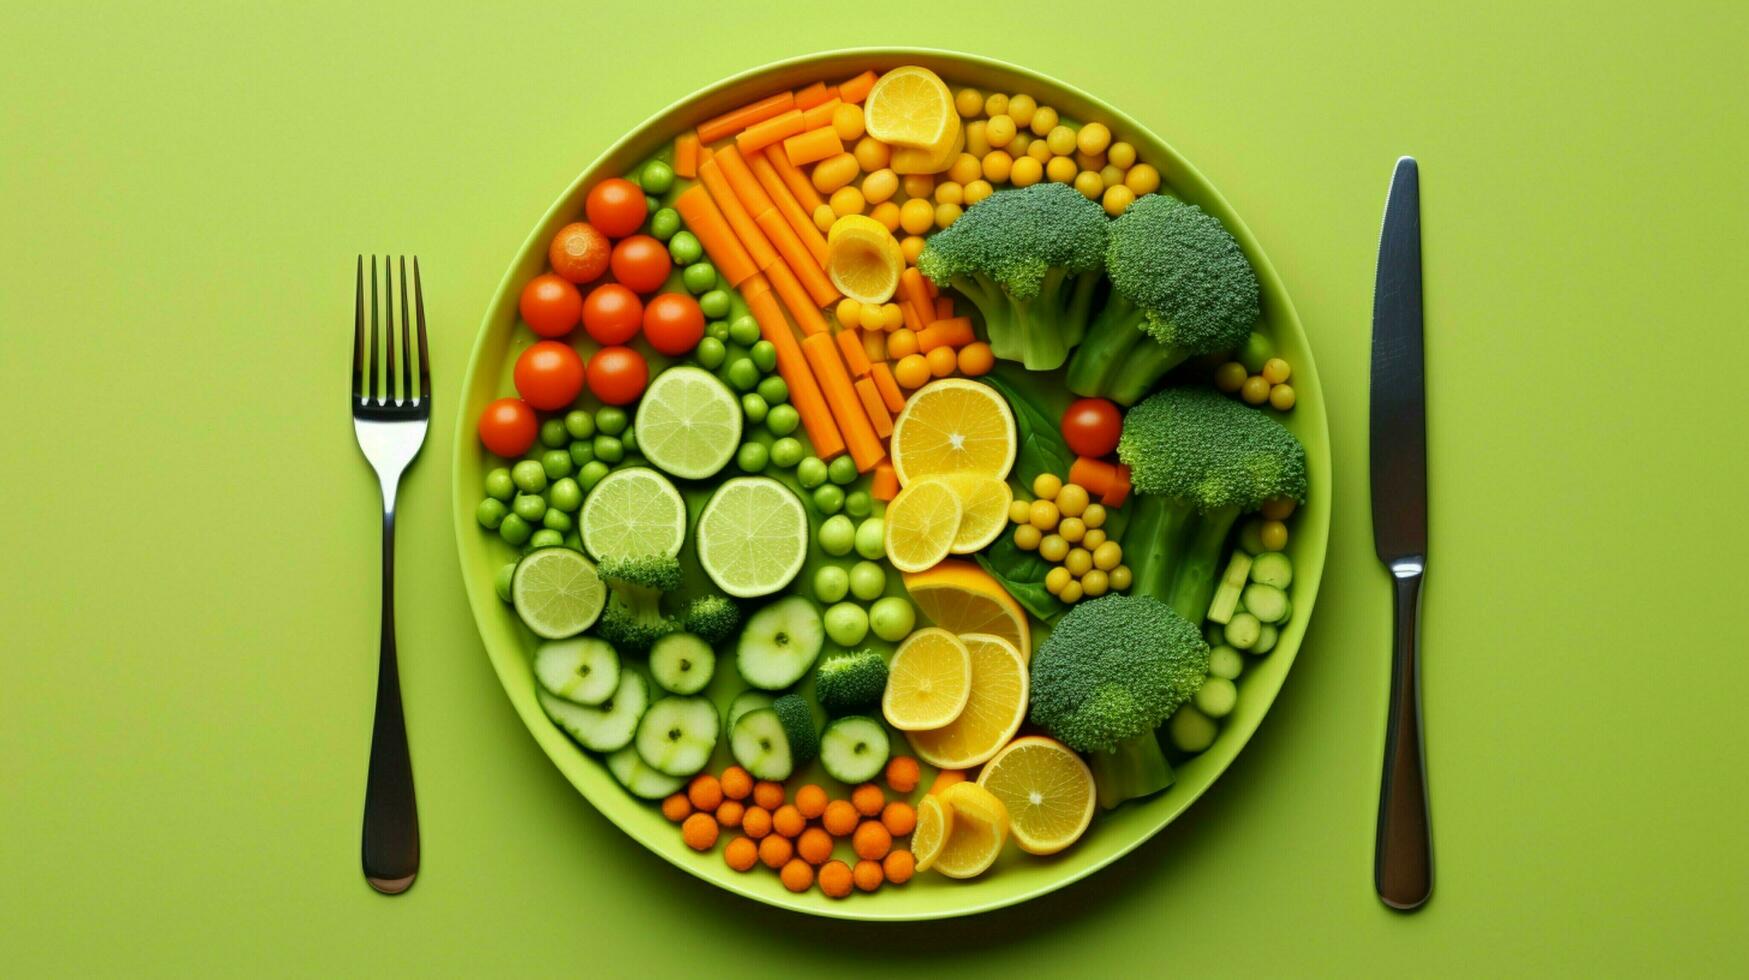 healthy eating fresh cooked vegetables on a plate photo